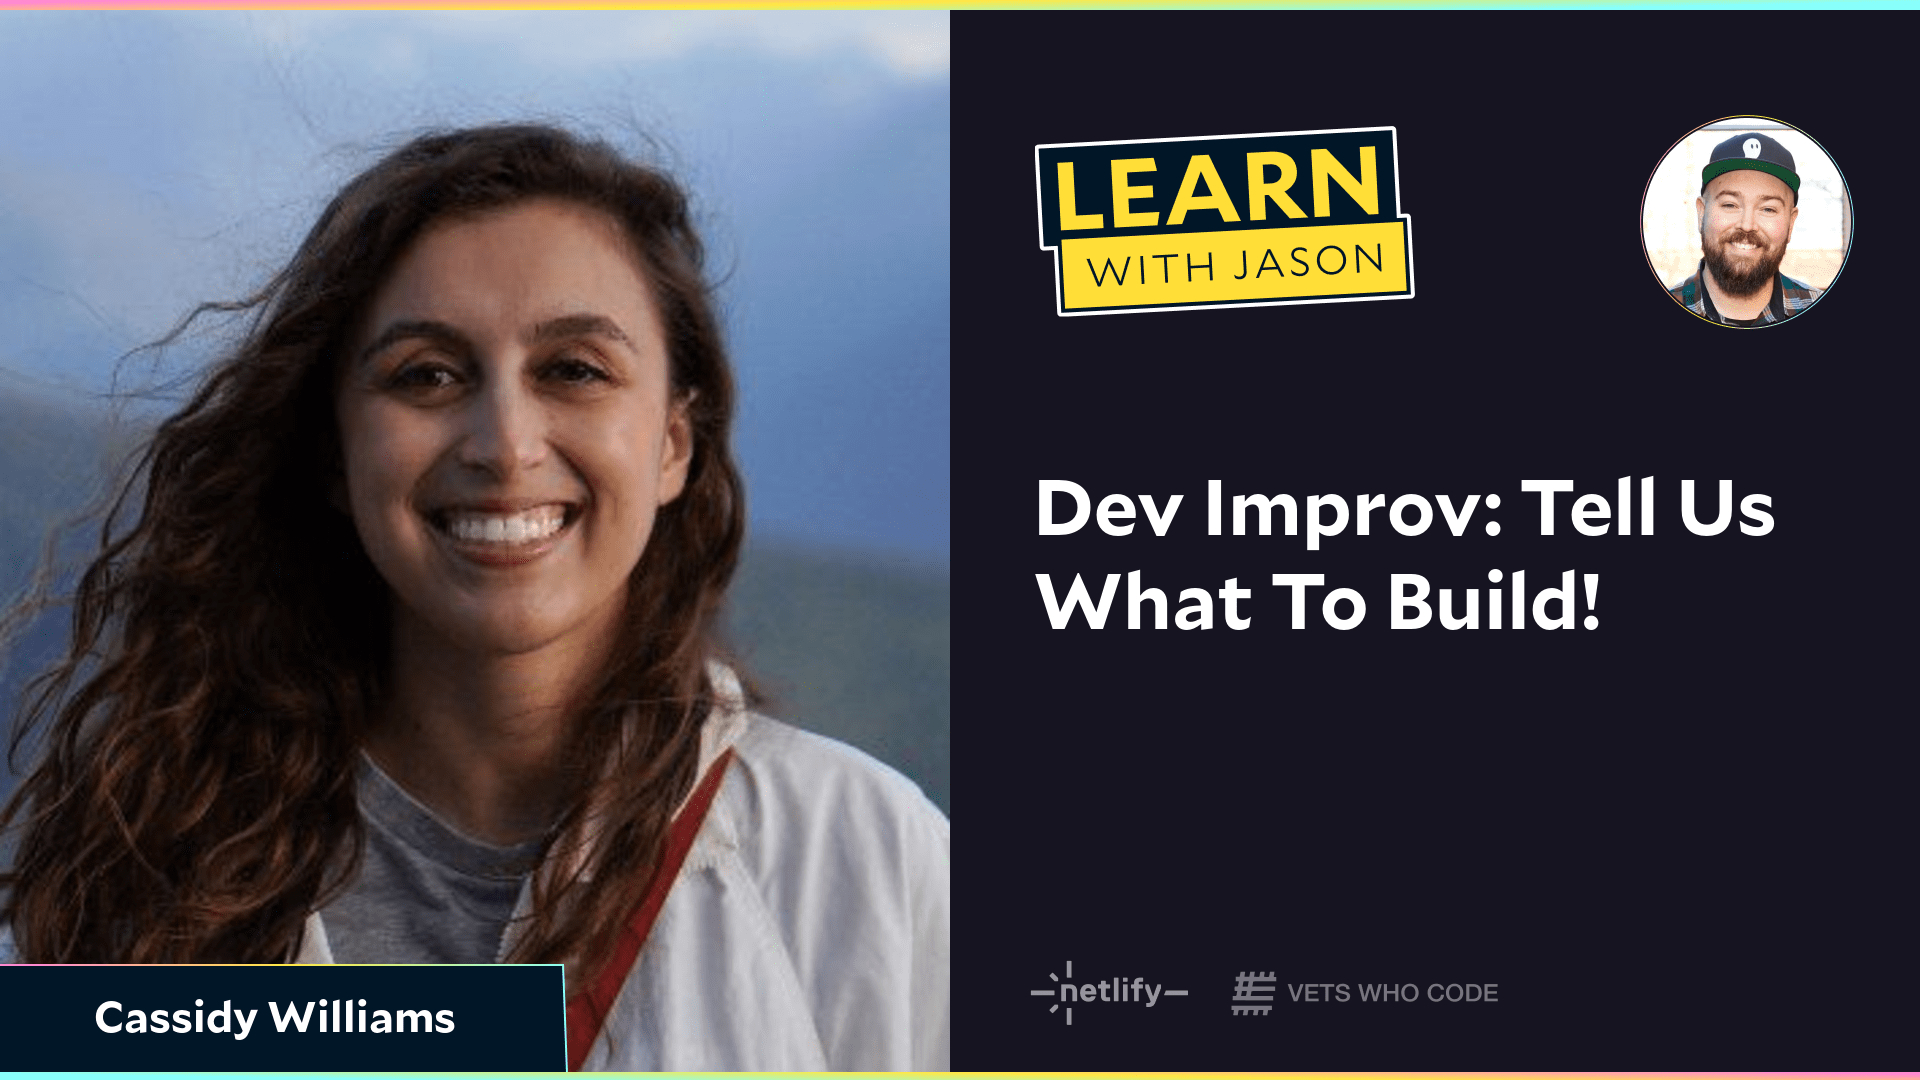 Dev Improv: Tell Us What To Build! (with Cassidy Williams)